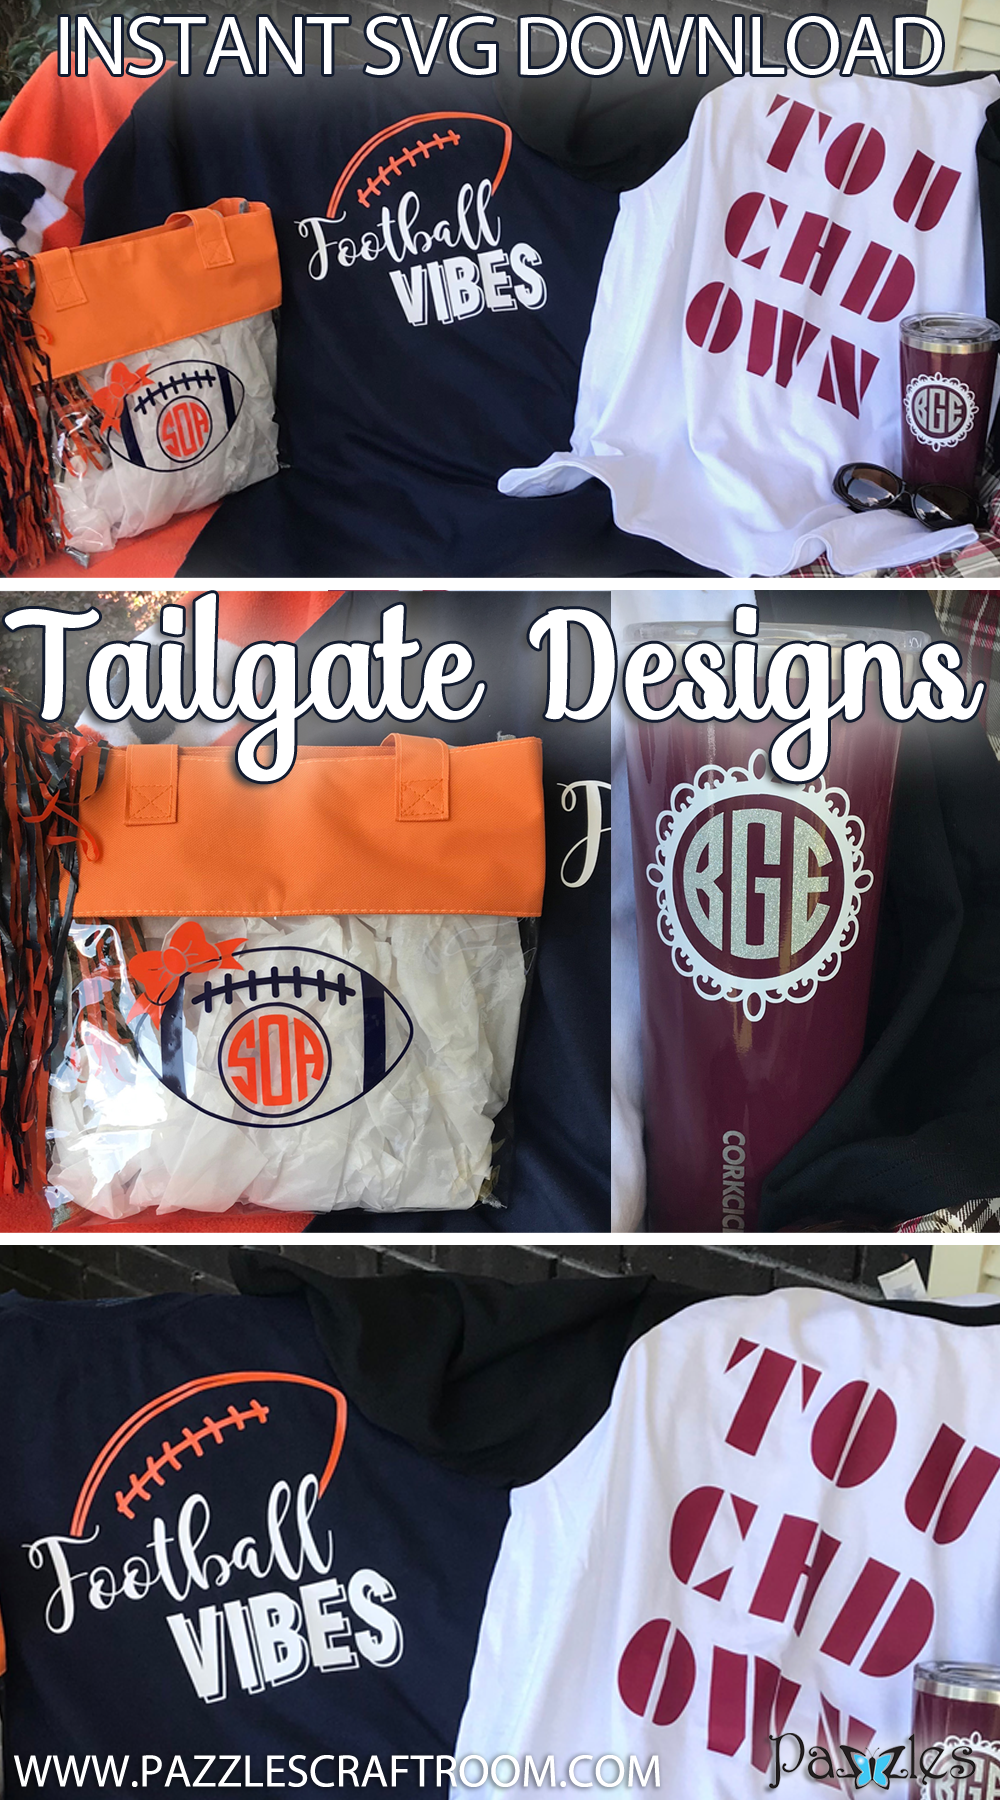 Pazzles DIY Football Designs Tailgate Collection in SVG, AI, and WPC Cutting Files by Leslie Peppers